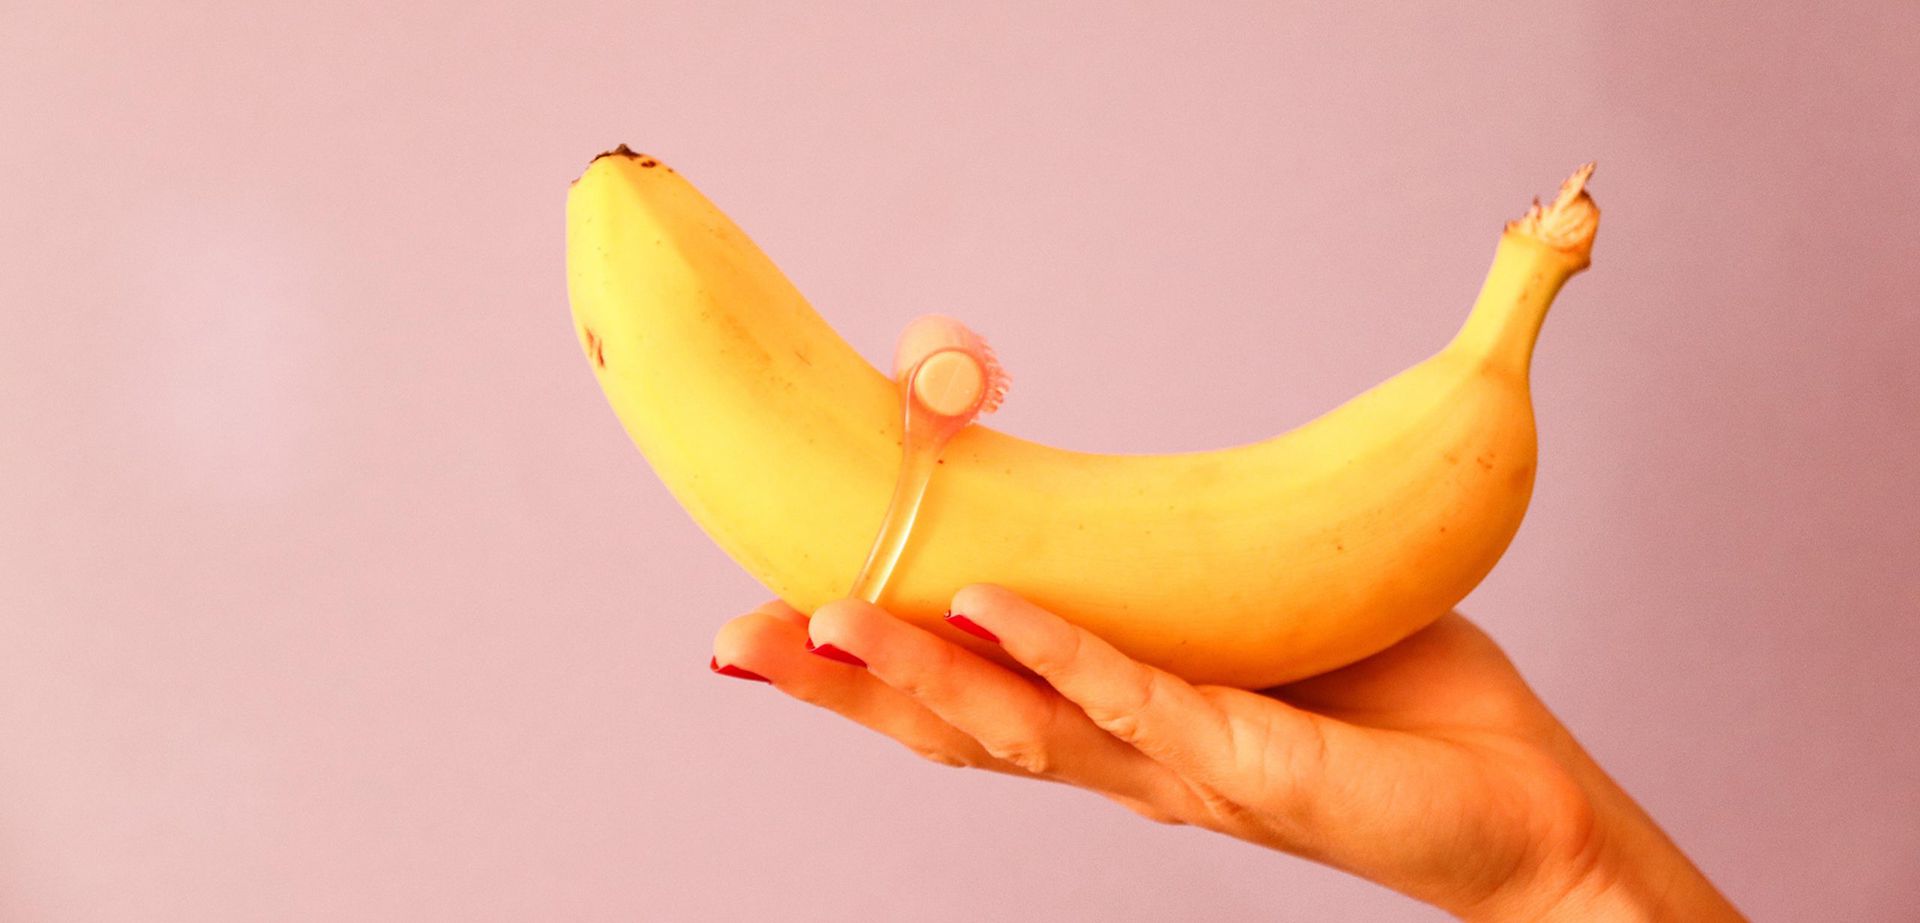 Example how to use a cock ring on a banana.